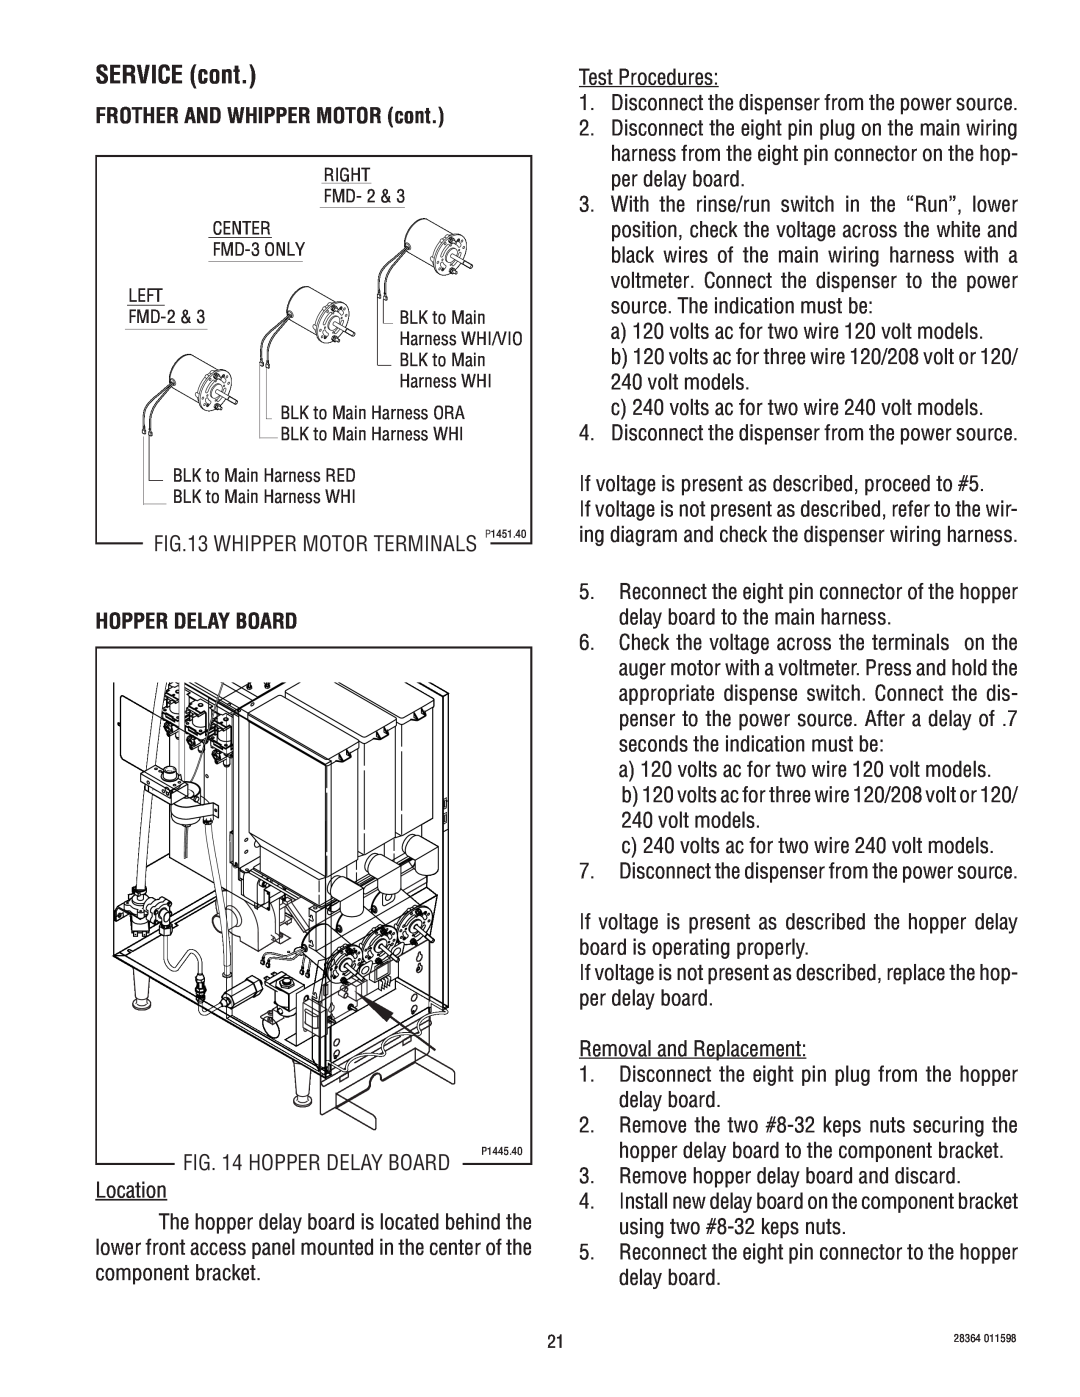 Bunn FMD-3 service manual Hopper Delay Board, SERVICE cont, FROTHER AND WHIPPER MOTOR cont 